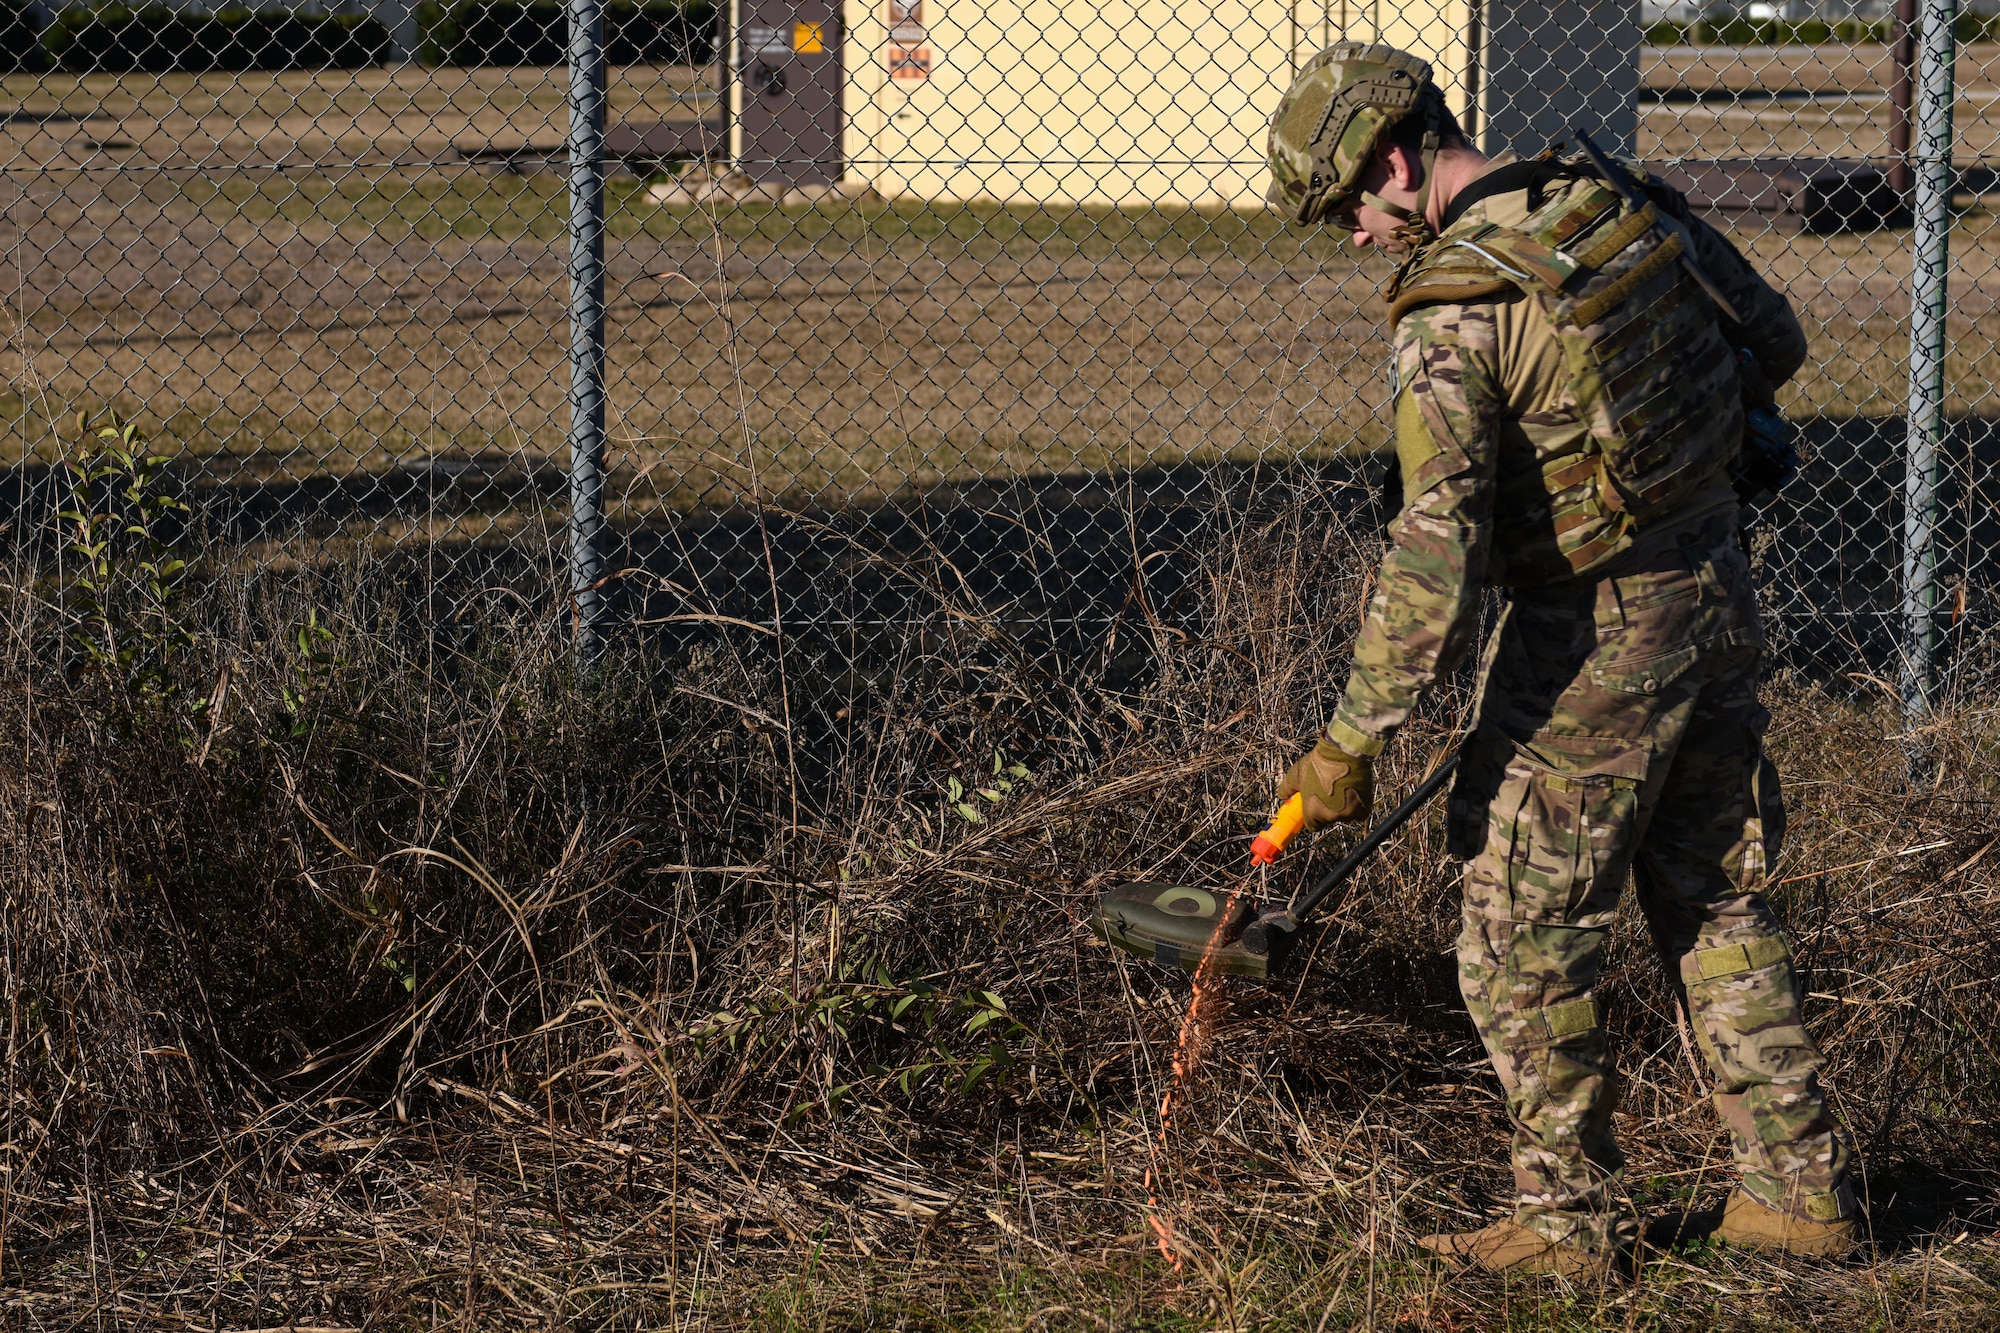 U.S. Air Force Staff Sgt. Jackson Judge, explosive ordnance team member from the 31 Civil Engineer Squadron, squeezes marking chalk during an training exercise at Aviano Air Base, Italy, Jan. 8, 2020. Marking chalk is used to mark a clear path or hazards. (U.S. Air Force photo by Airman 1st Class Ericka A. Woolever).